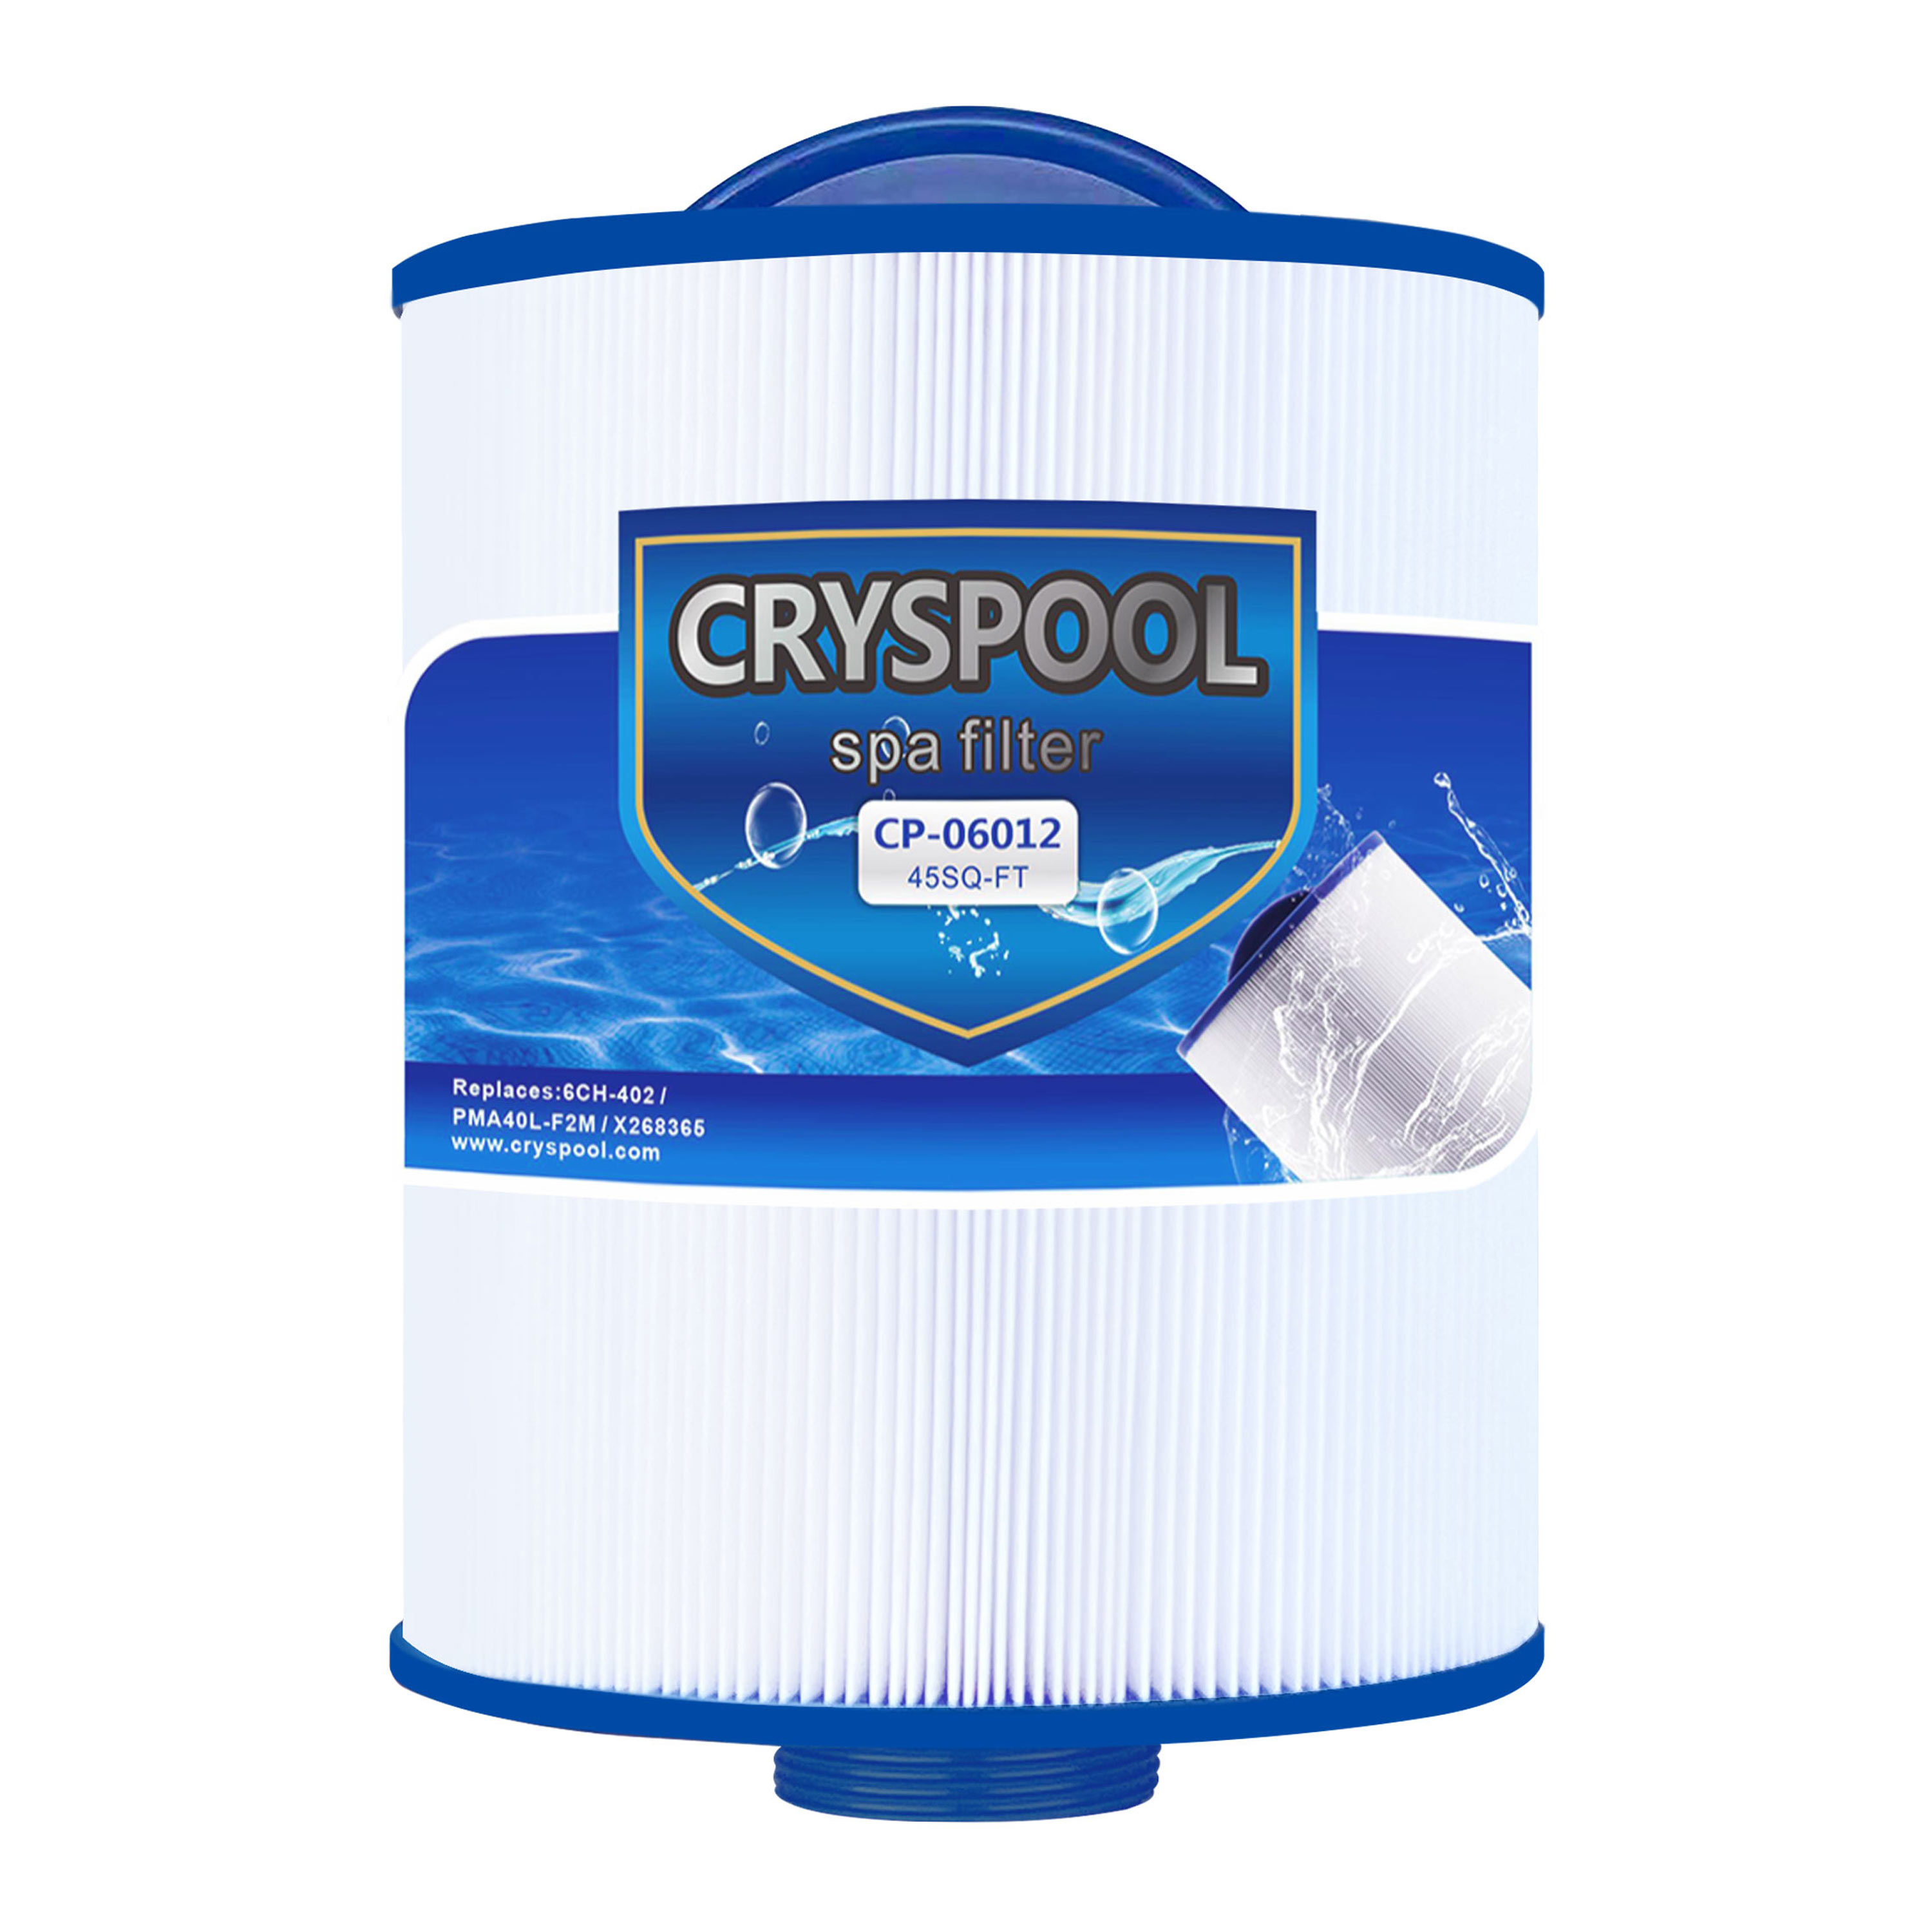 Cryspool PMA40L Spa Filter Compatible with Unicel 6CH-402,PMA40L-F2M,X268543,Master Spas Twilight X268365,X26851,X268514, 40 sq.ft Featured Image